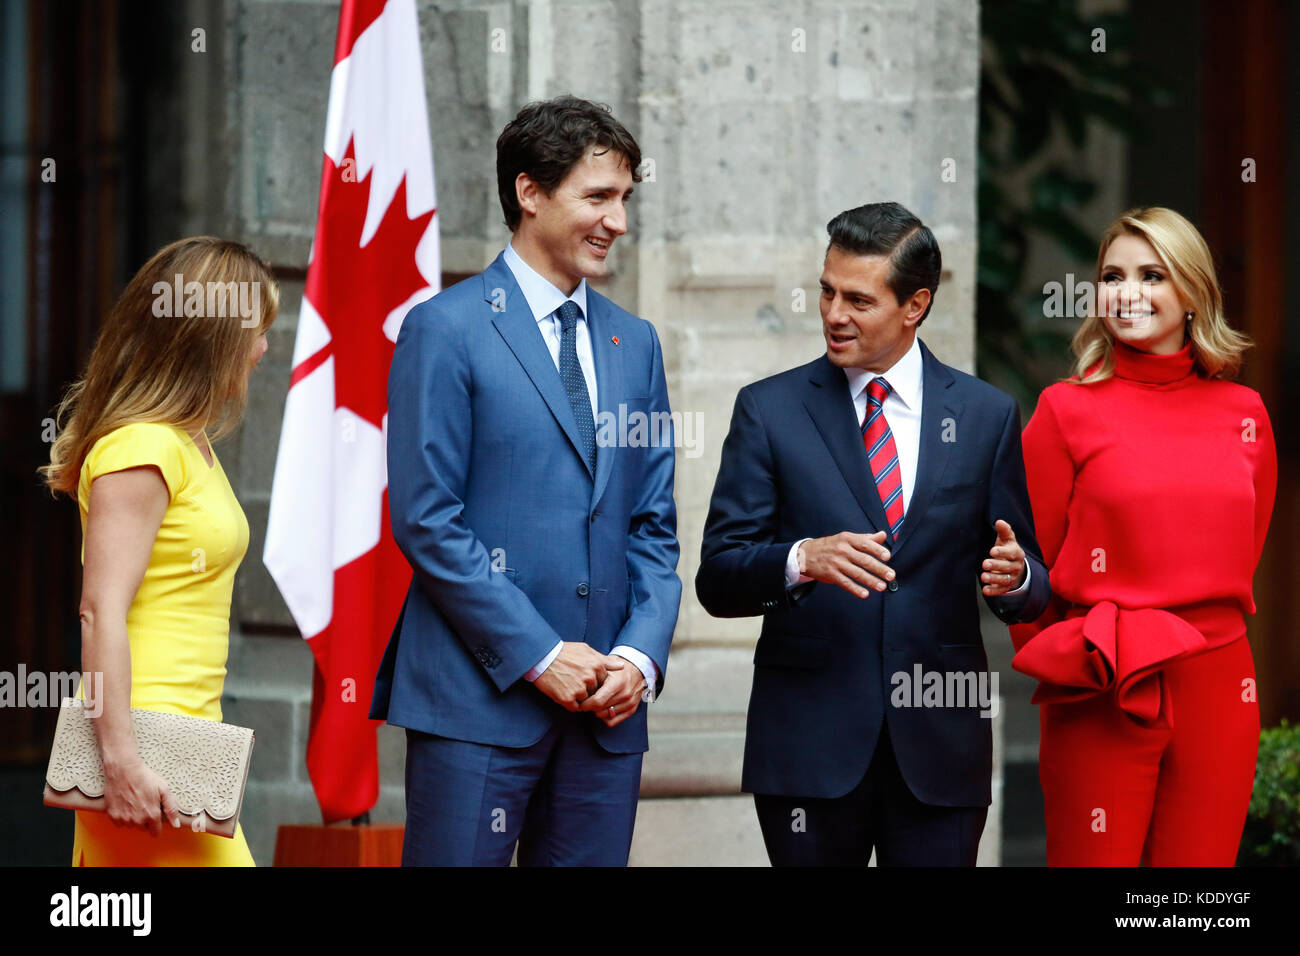 Mexico City, Mexico. 12th Oct, 2017. Mexican President, Enrique Pena Nieto (2nd R), his wife Angelica Rivera (R), welcomes Canada's Prime Minister Justin Trudeau (2nd L) and his wife Sophie Gregoire (L), at the National Palace, in Mexico City, Mexico, on Oct. 12, 2017. Canadian Prime Minister Justin Trudeau arrived on Thursday for his first official visit to Mexico. Credit: Francisco Canedo/Xinhua/Alamy Live News Stock Photo